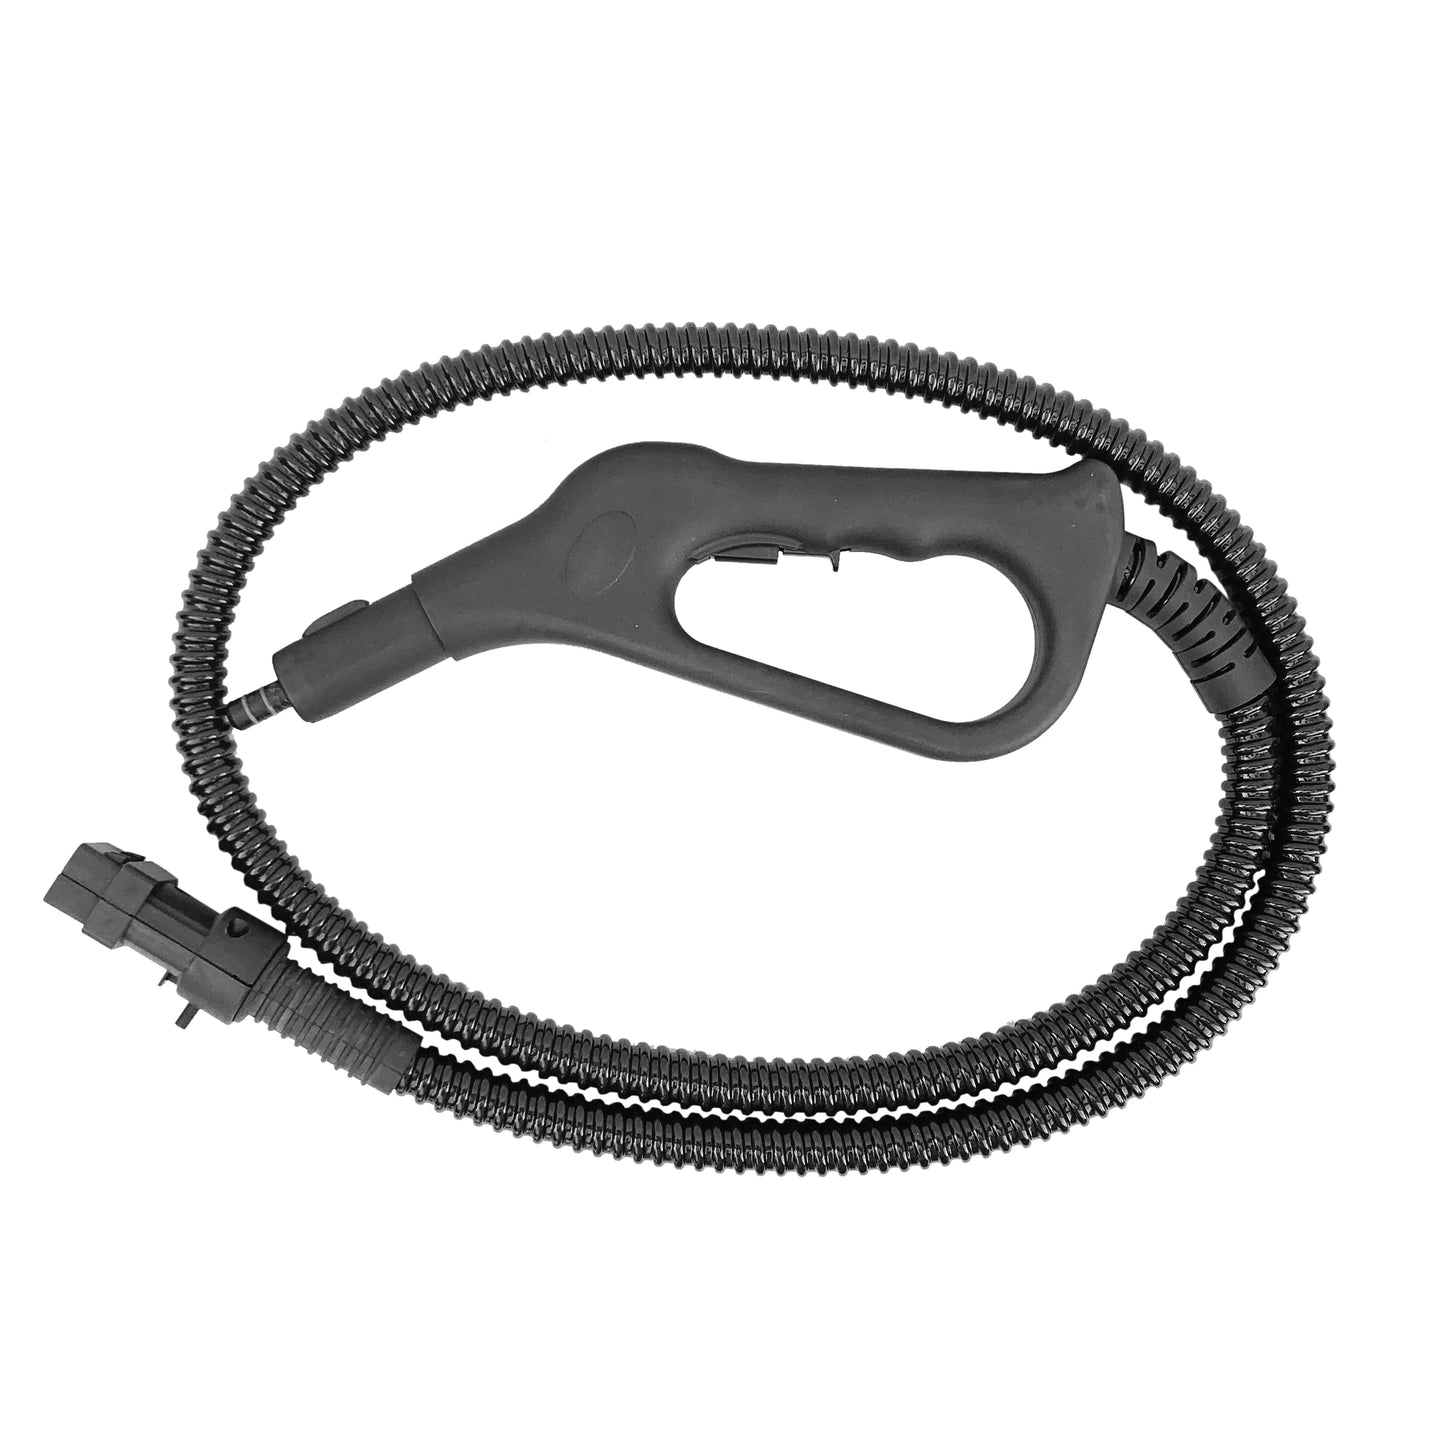 Trigger Gun and Replacement Hose for Aqua Pro Steamer